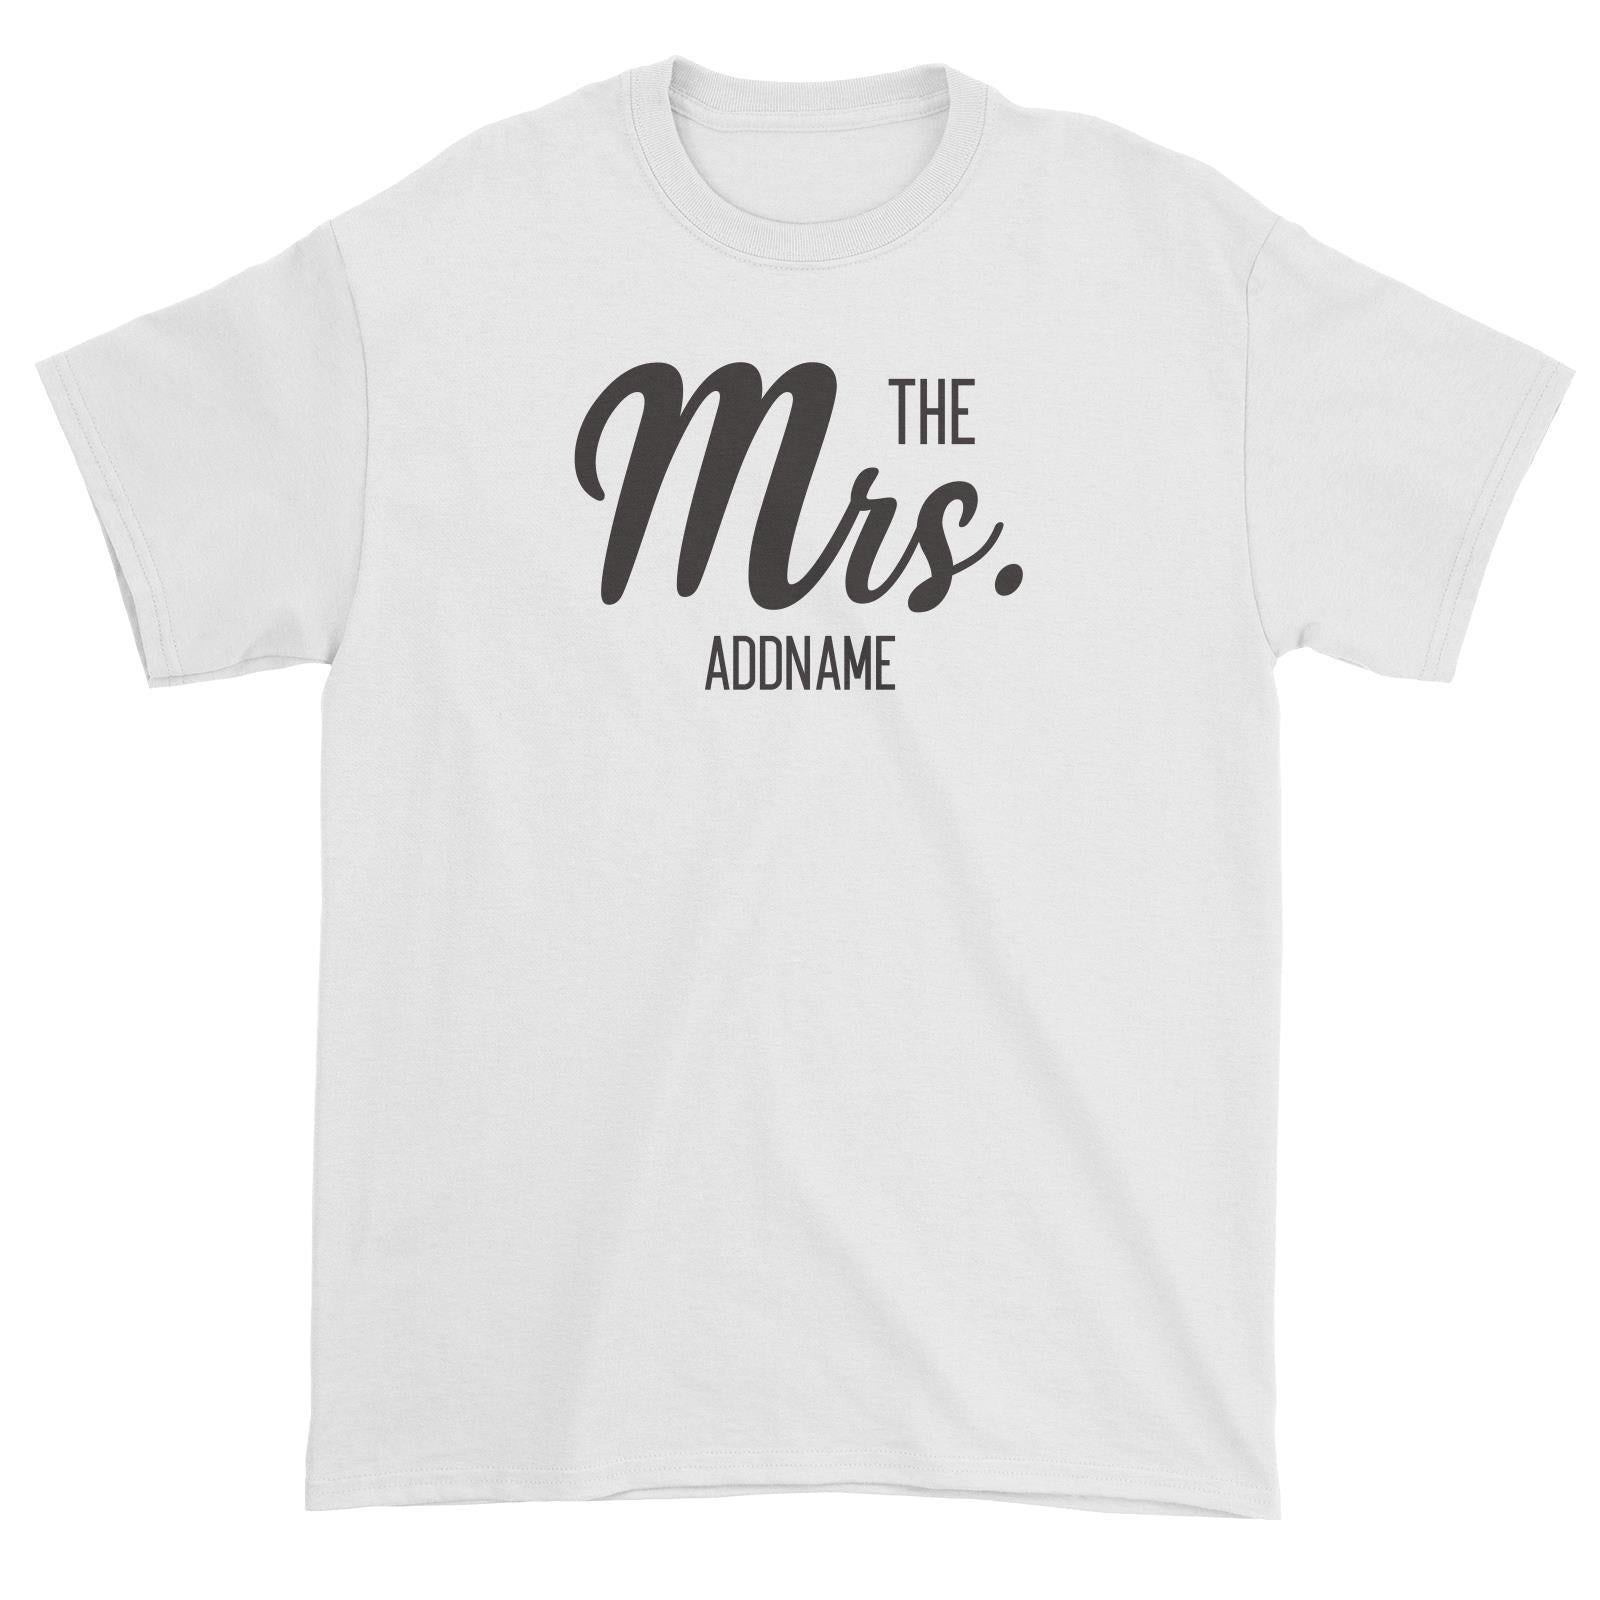 Husband and Wife The Mrs. Addname Unisex T-Shirt